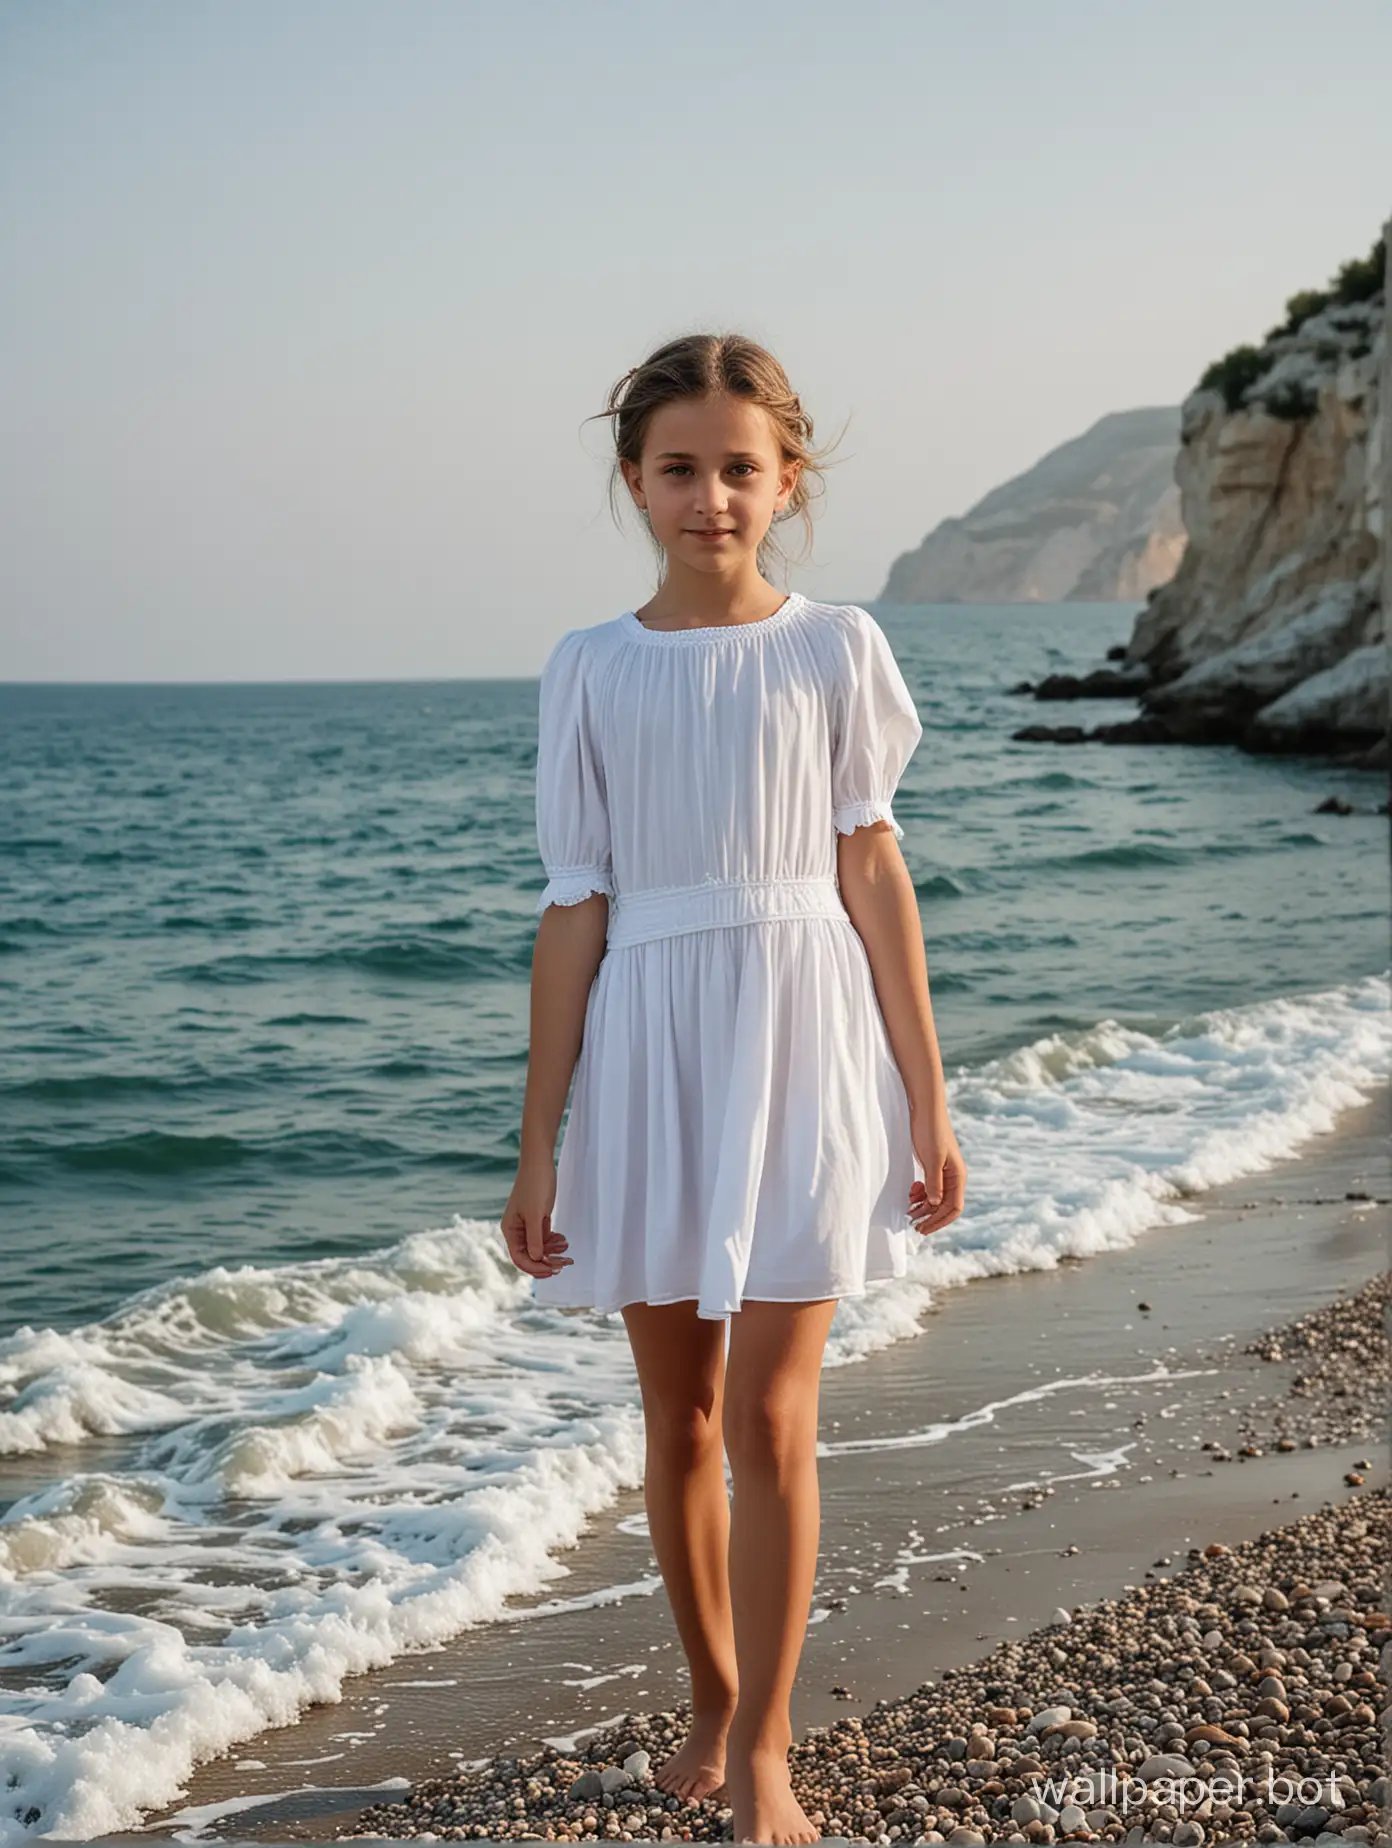 Crimea, by the sea, an 11-year-old girl in a short white dress